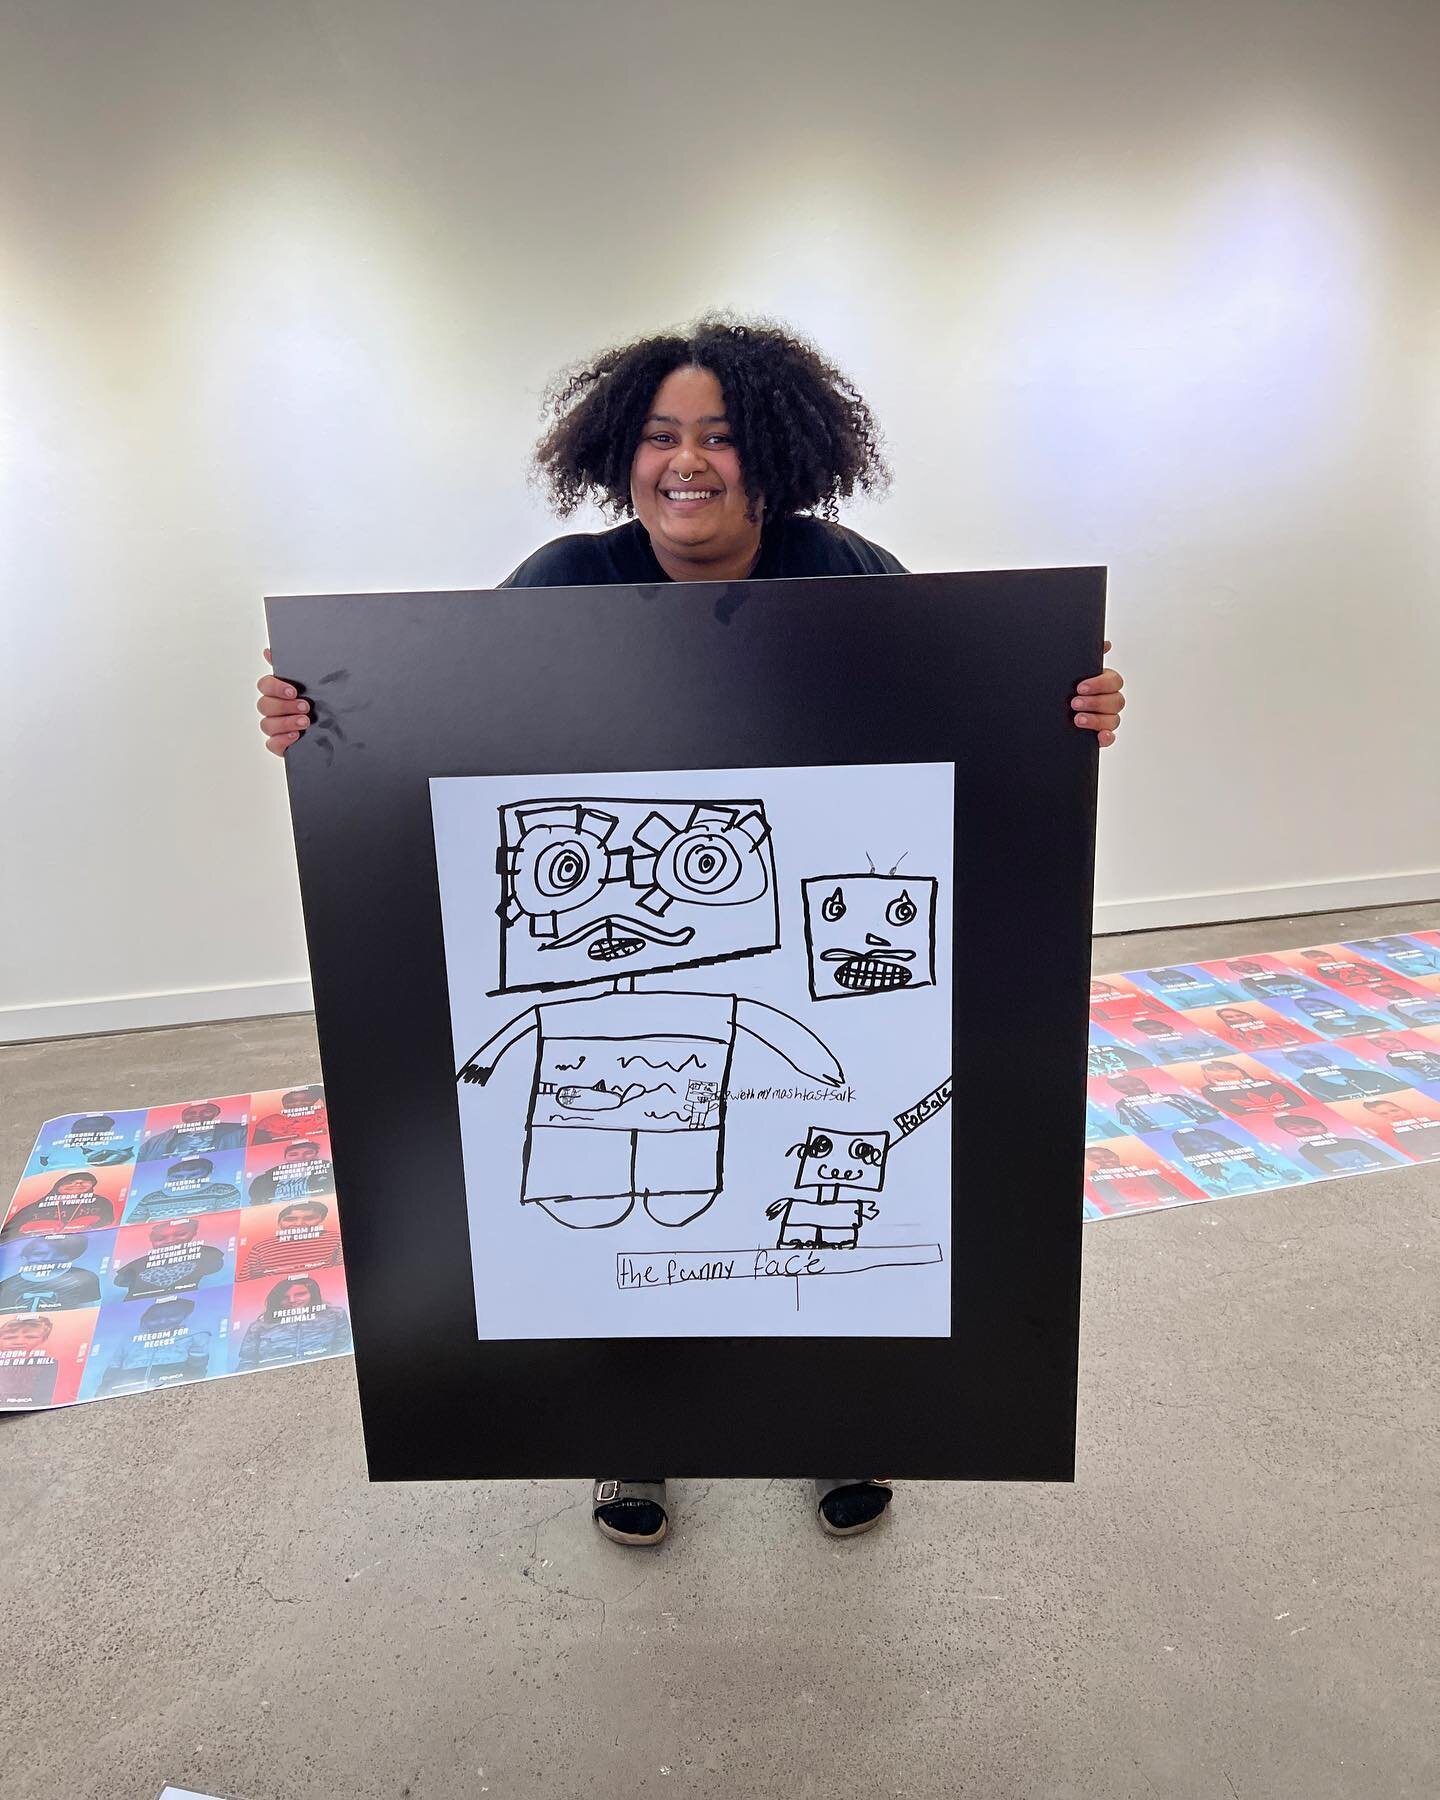 Installing Welcome To My Happy Place, an exhibition about KSMoCA at PSU&rsquo;s @littmanandwhite curated by Dr Kiara Hill @k3tellem and Rose a 5th Grader at @mlk_school_pdx supported by Littman and White&rsquo;s Gallery director @safiyah.maurice